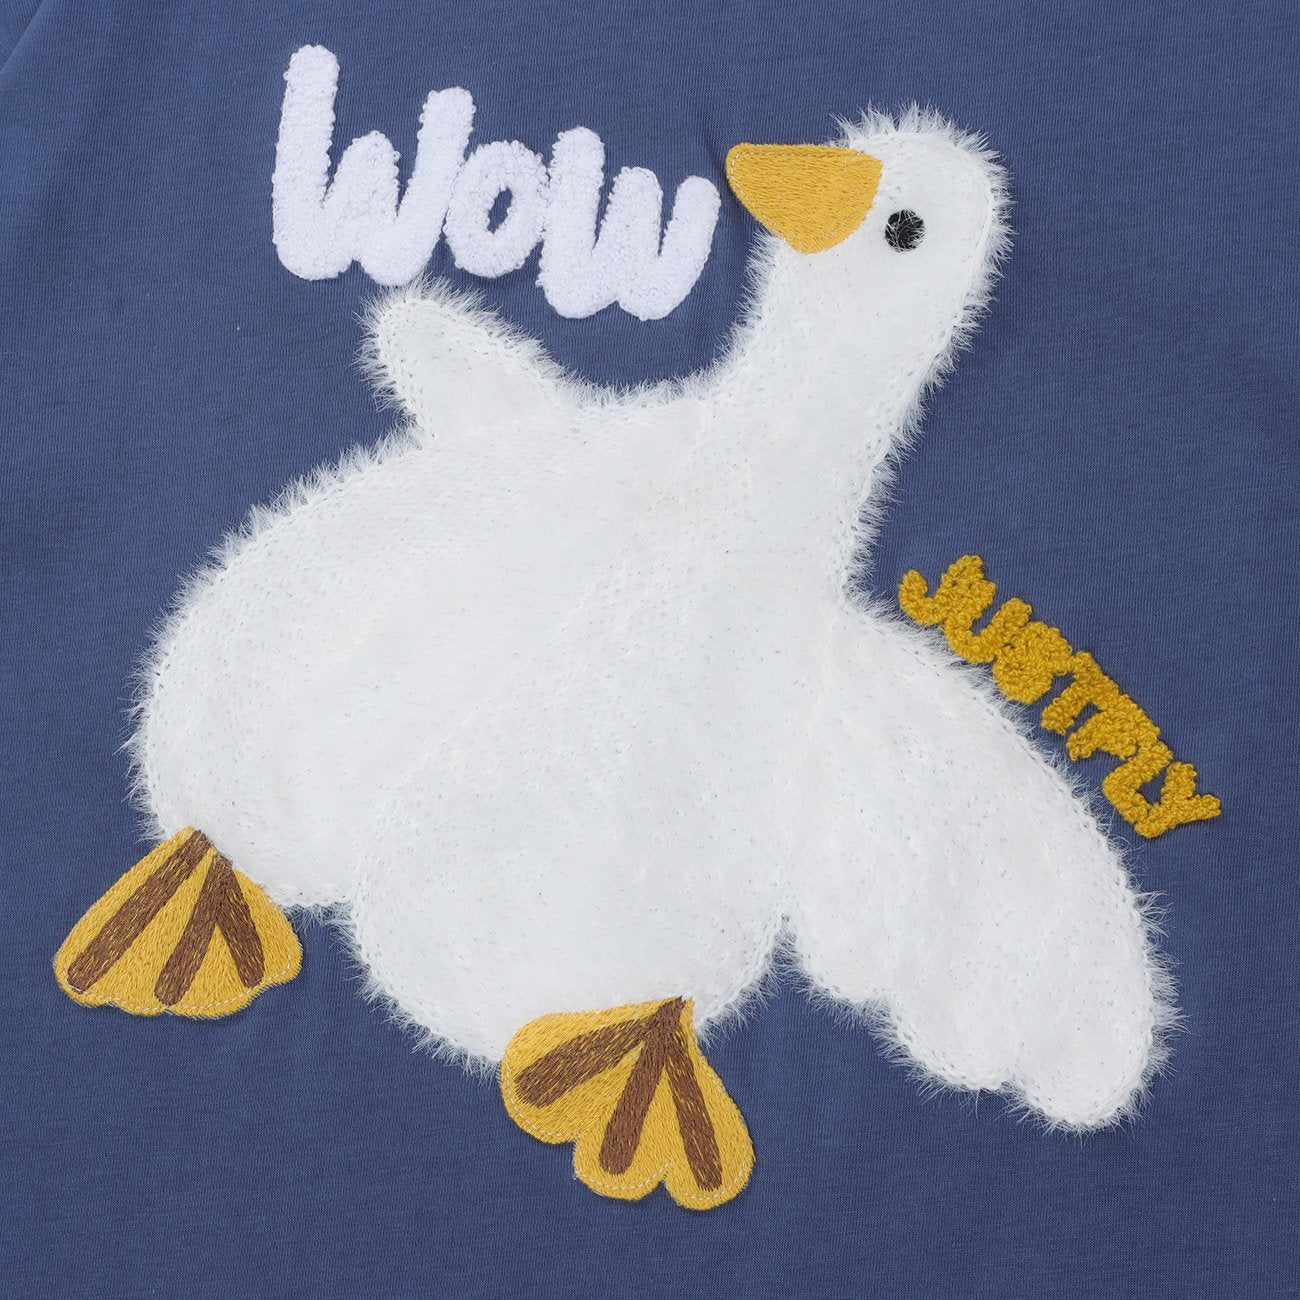 JUSTNOTAG Wow Goose Plush Embroider Short Sleeve Tee